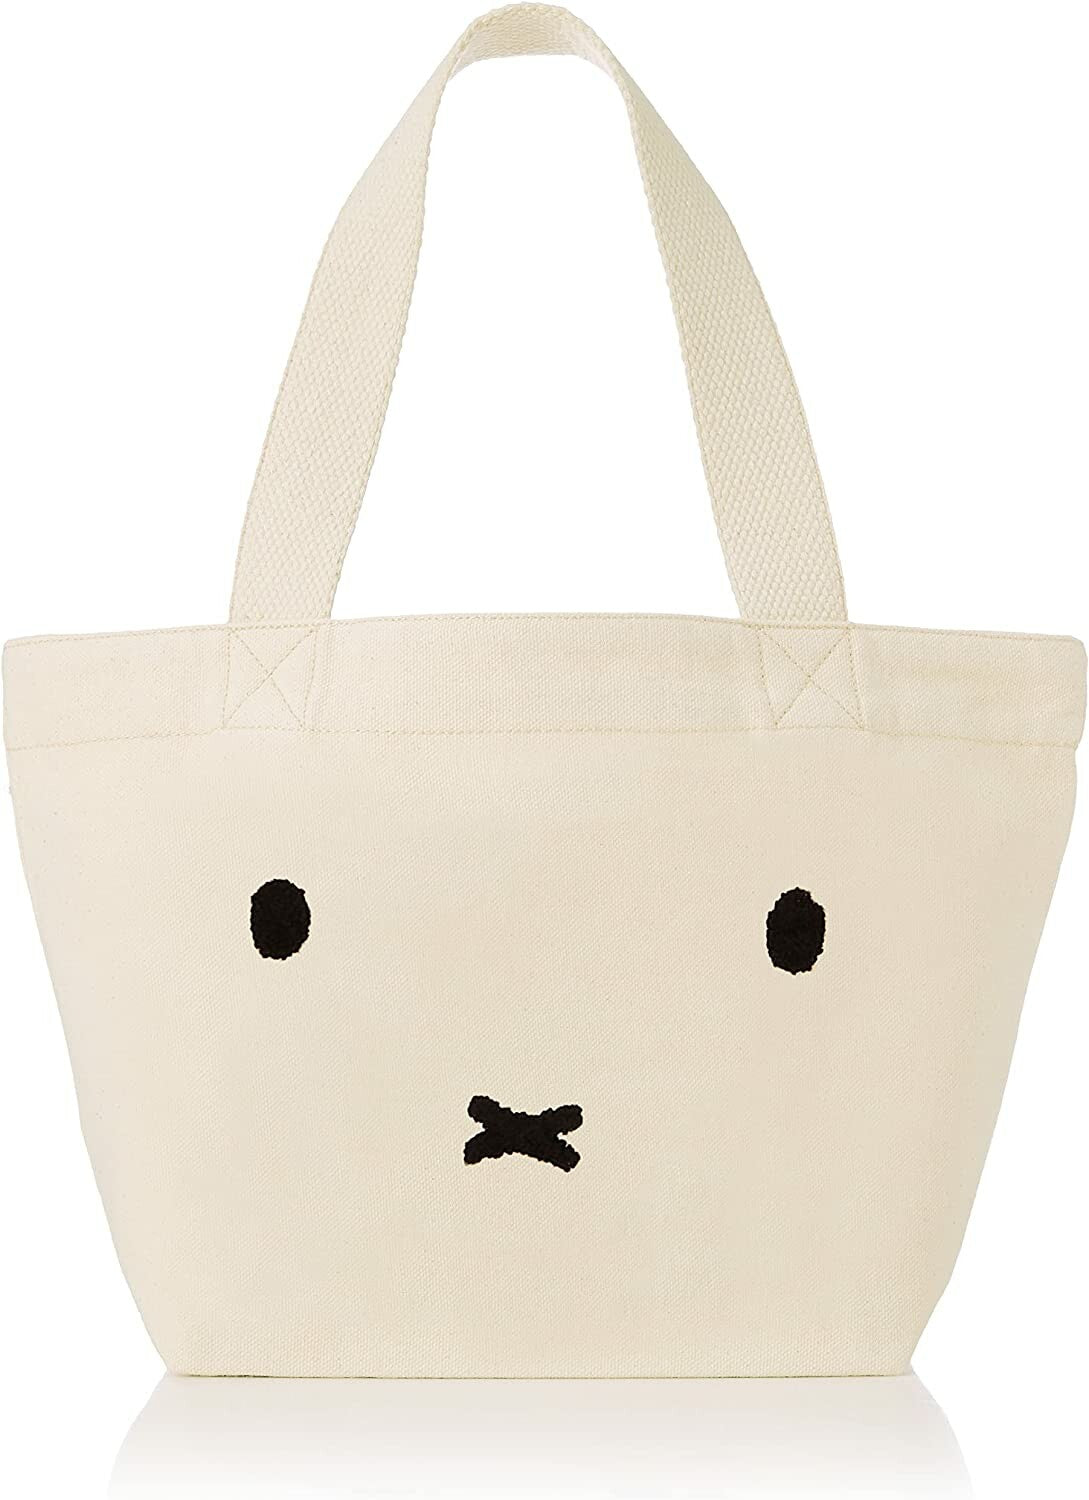 Miffy Tote/ Lunch Bag